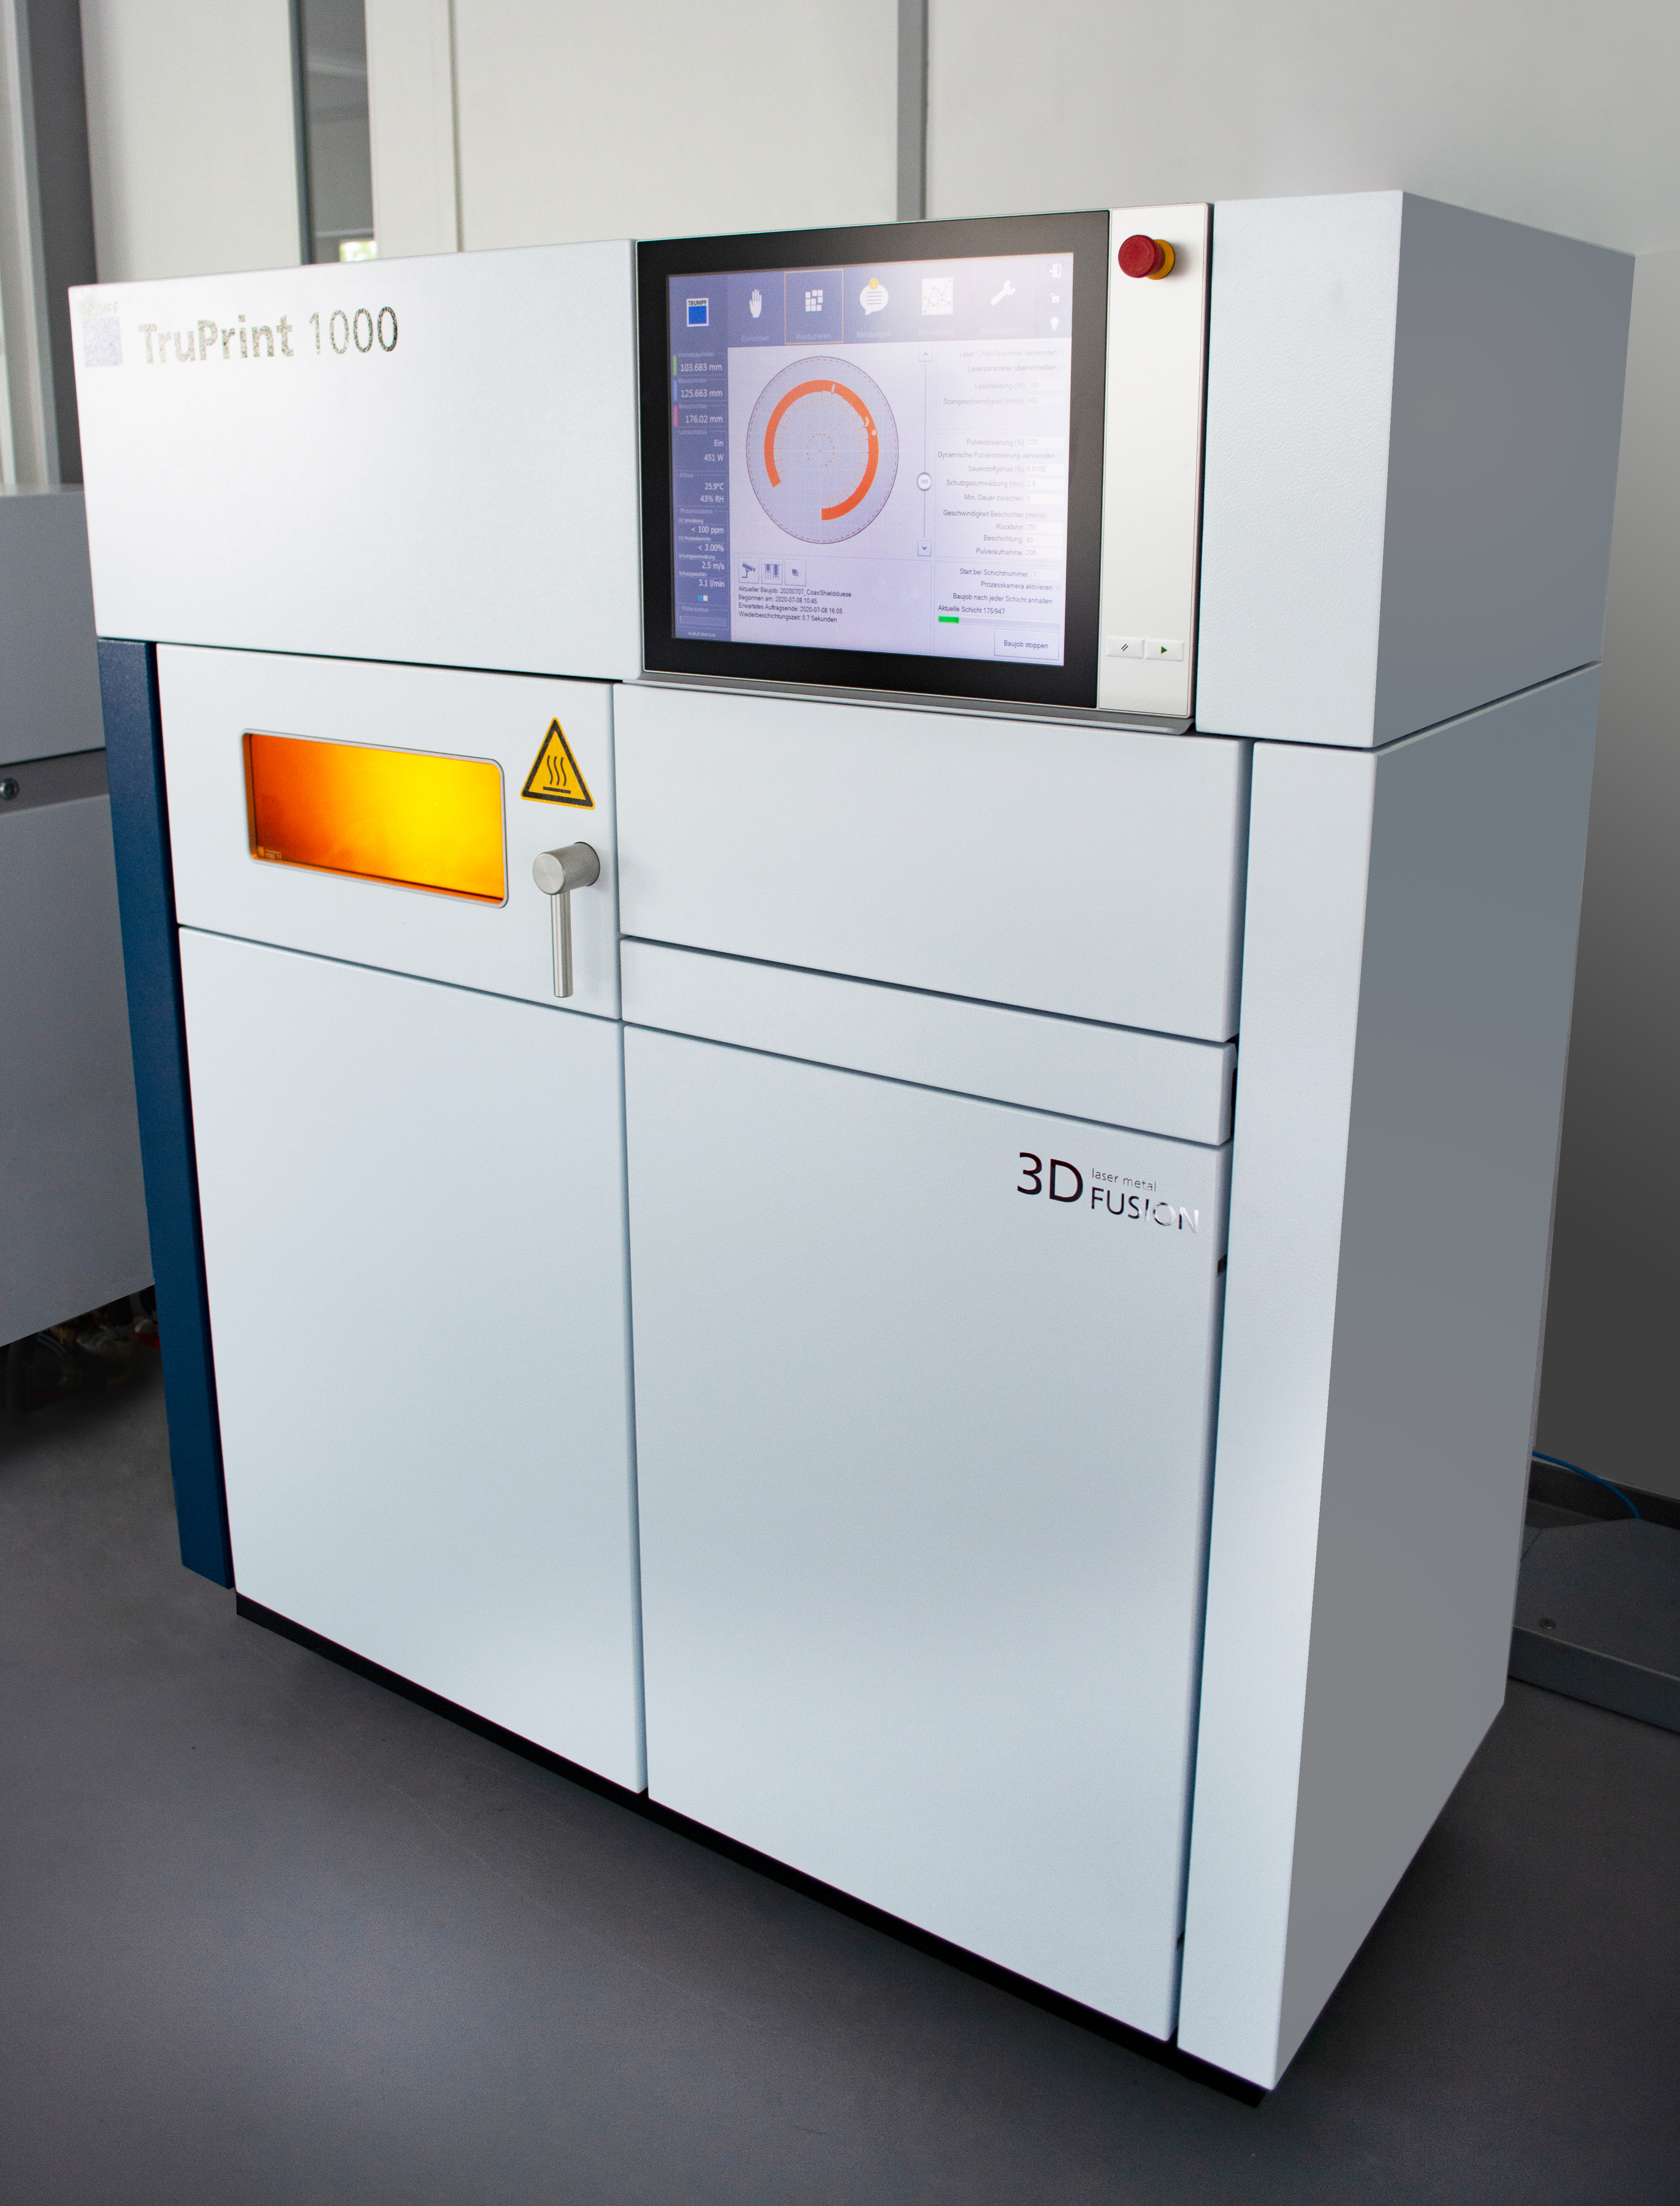 Equipped with a green laser, the “TruPrint1000” now belongs to the “Additive Manufacturing Center Dresden” (AMCD).